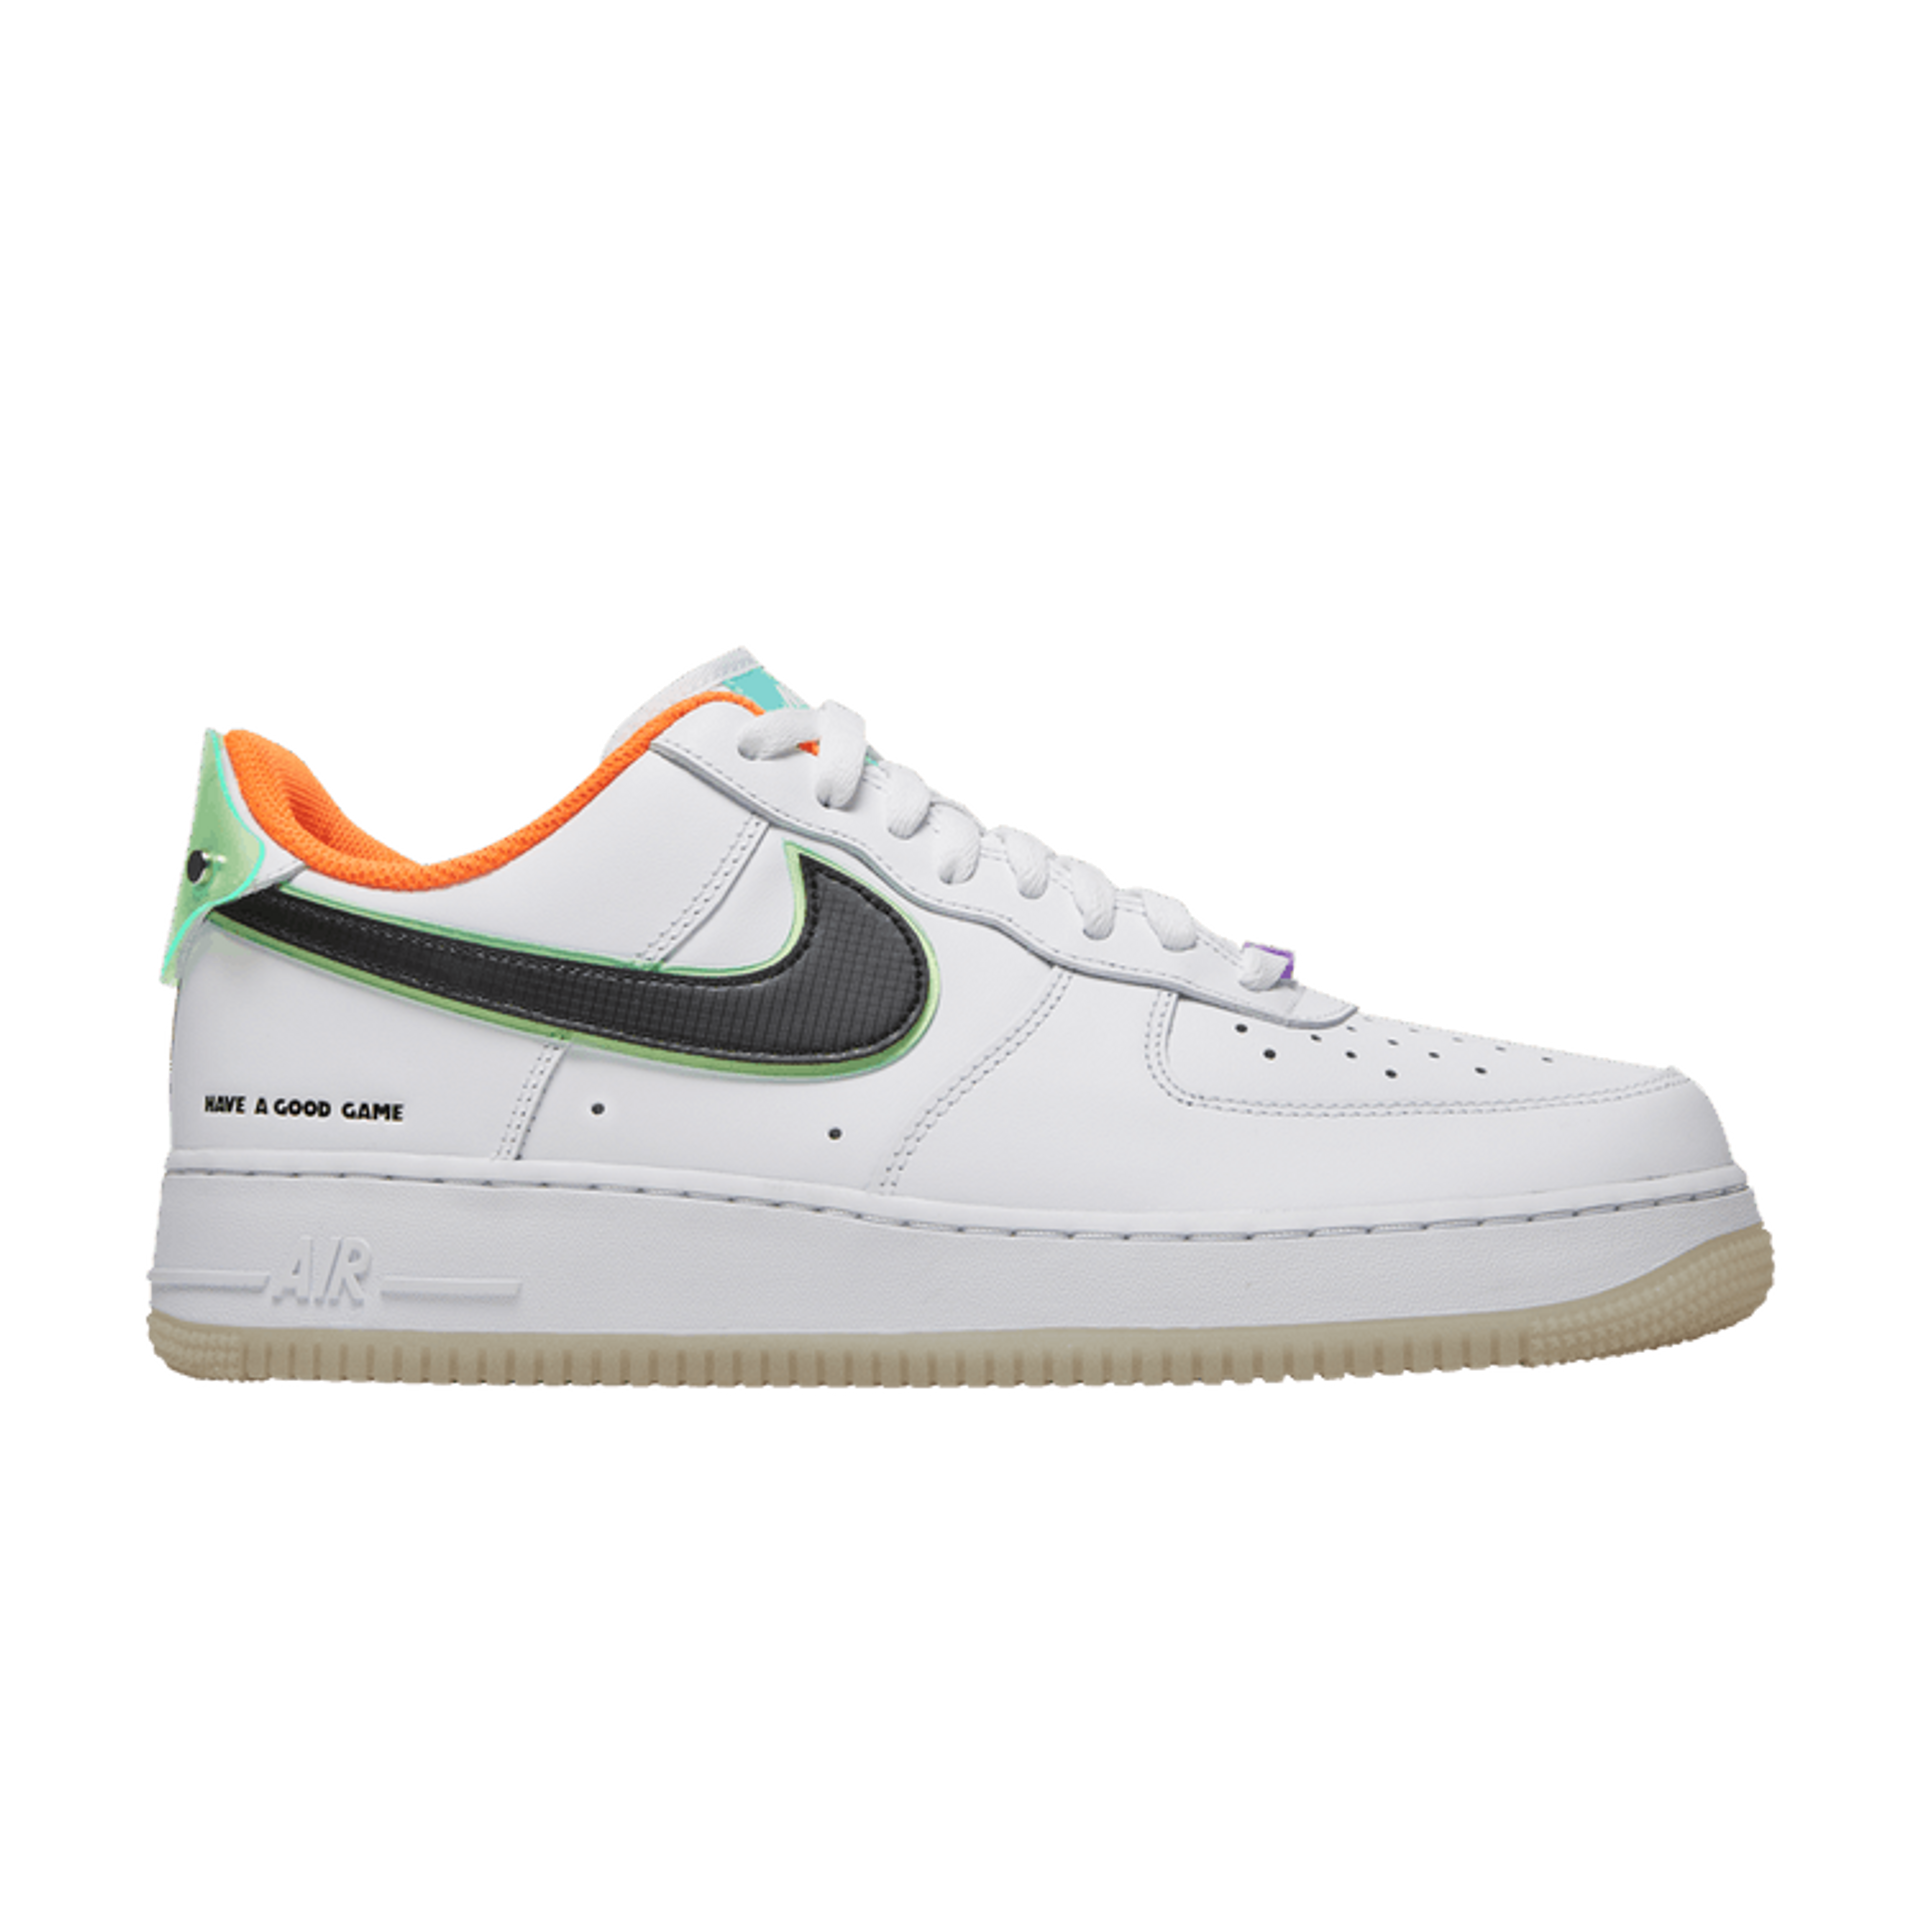 Air Force 1 '07 LE 'Have A Good Game'